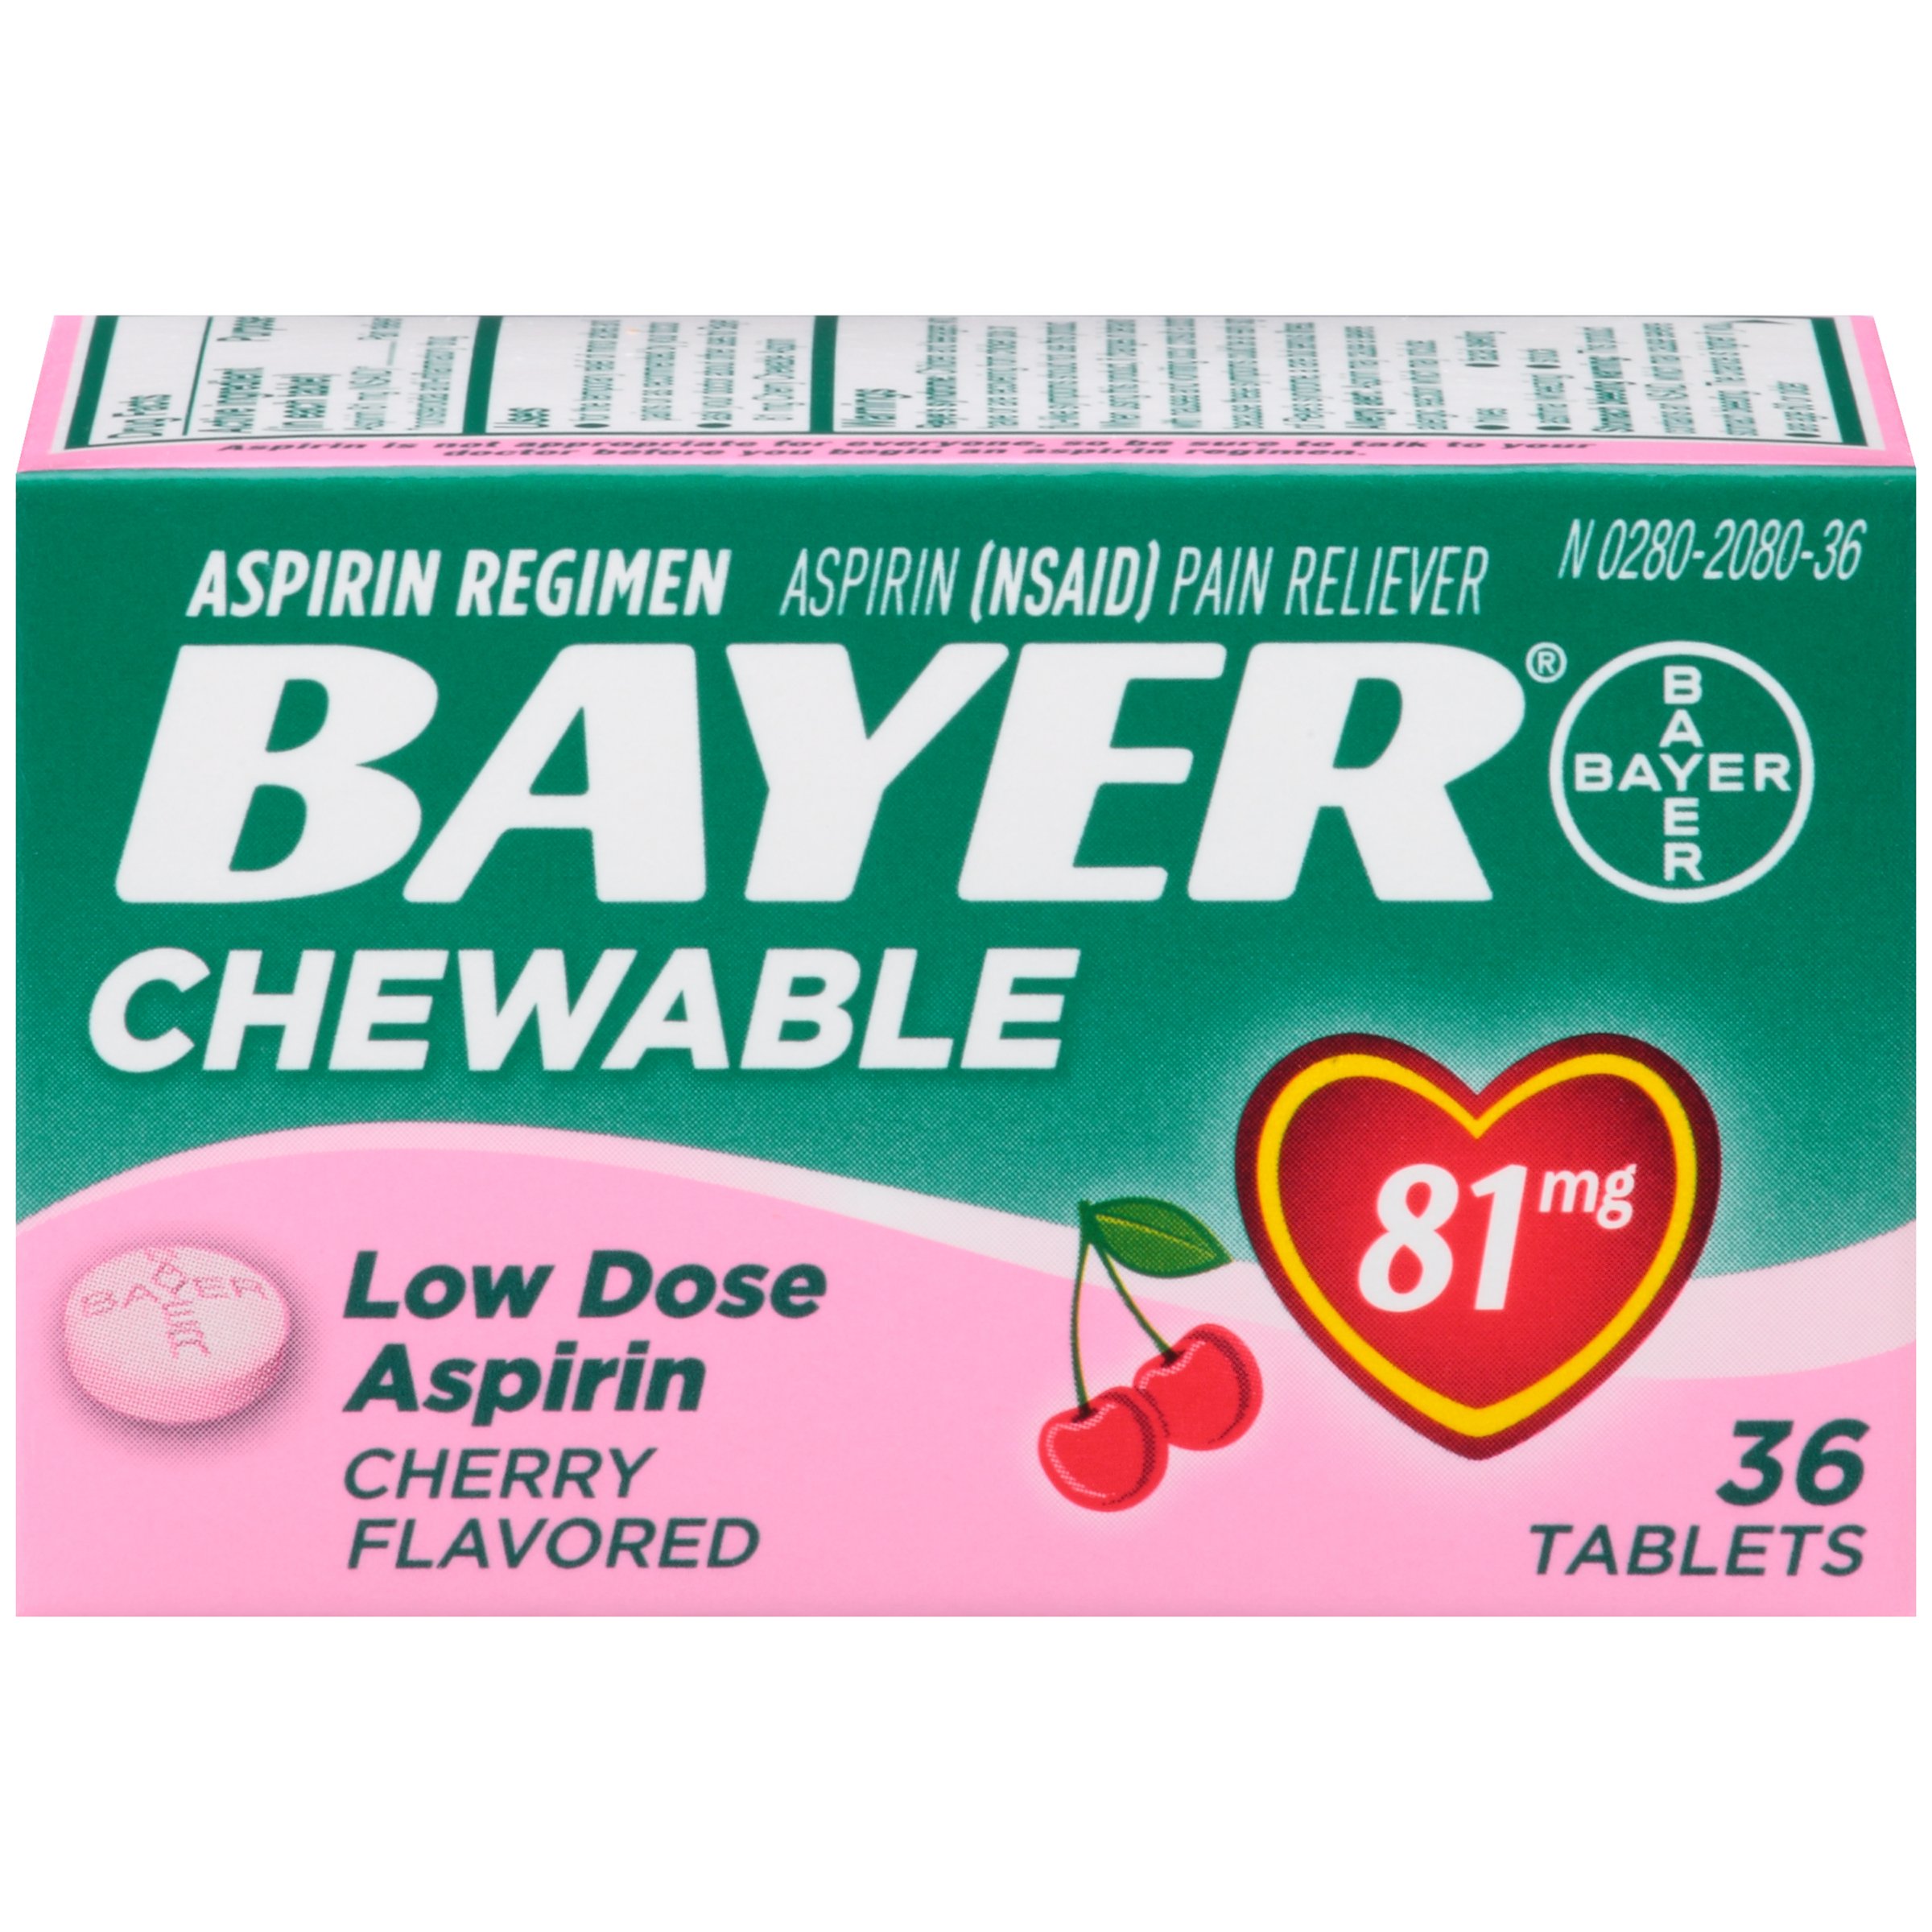 Bayer Aspirin Regimen, 81mg Chewable Tablets, Pain Reliever, Cherry, 36 Count (Pack of 2)